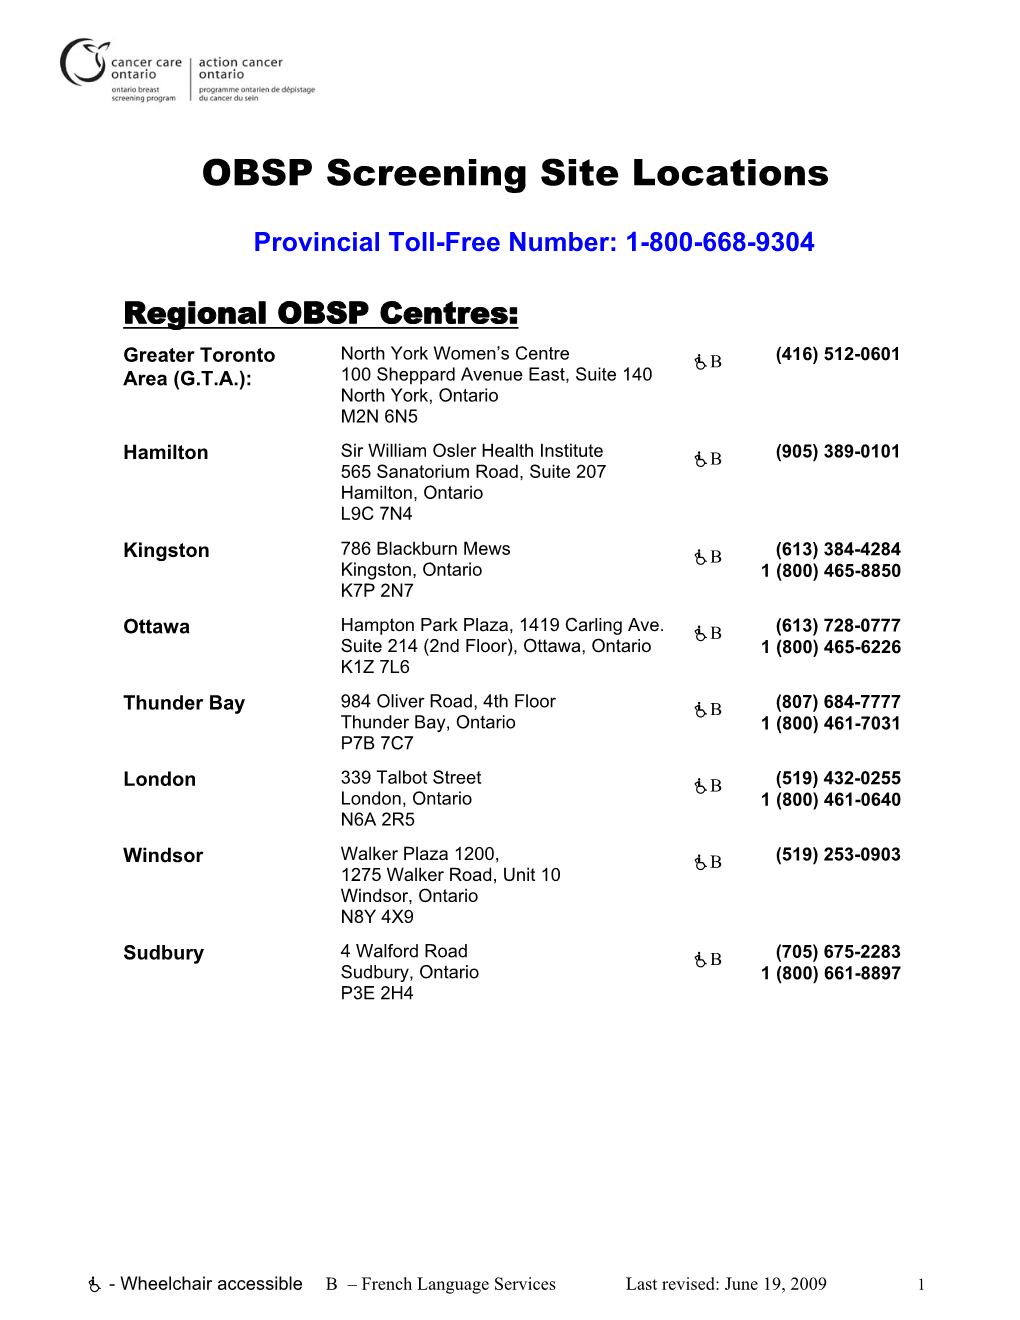 OBSP Screening Site Locations (Wheelchair Accessible)